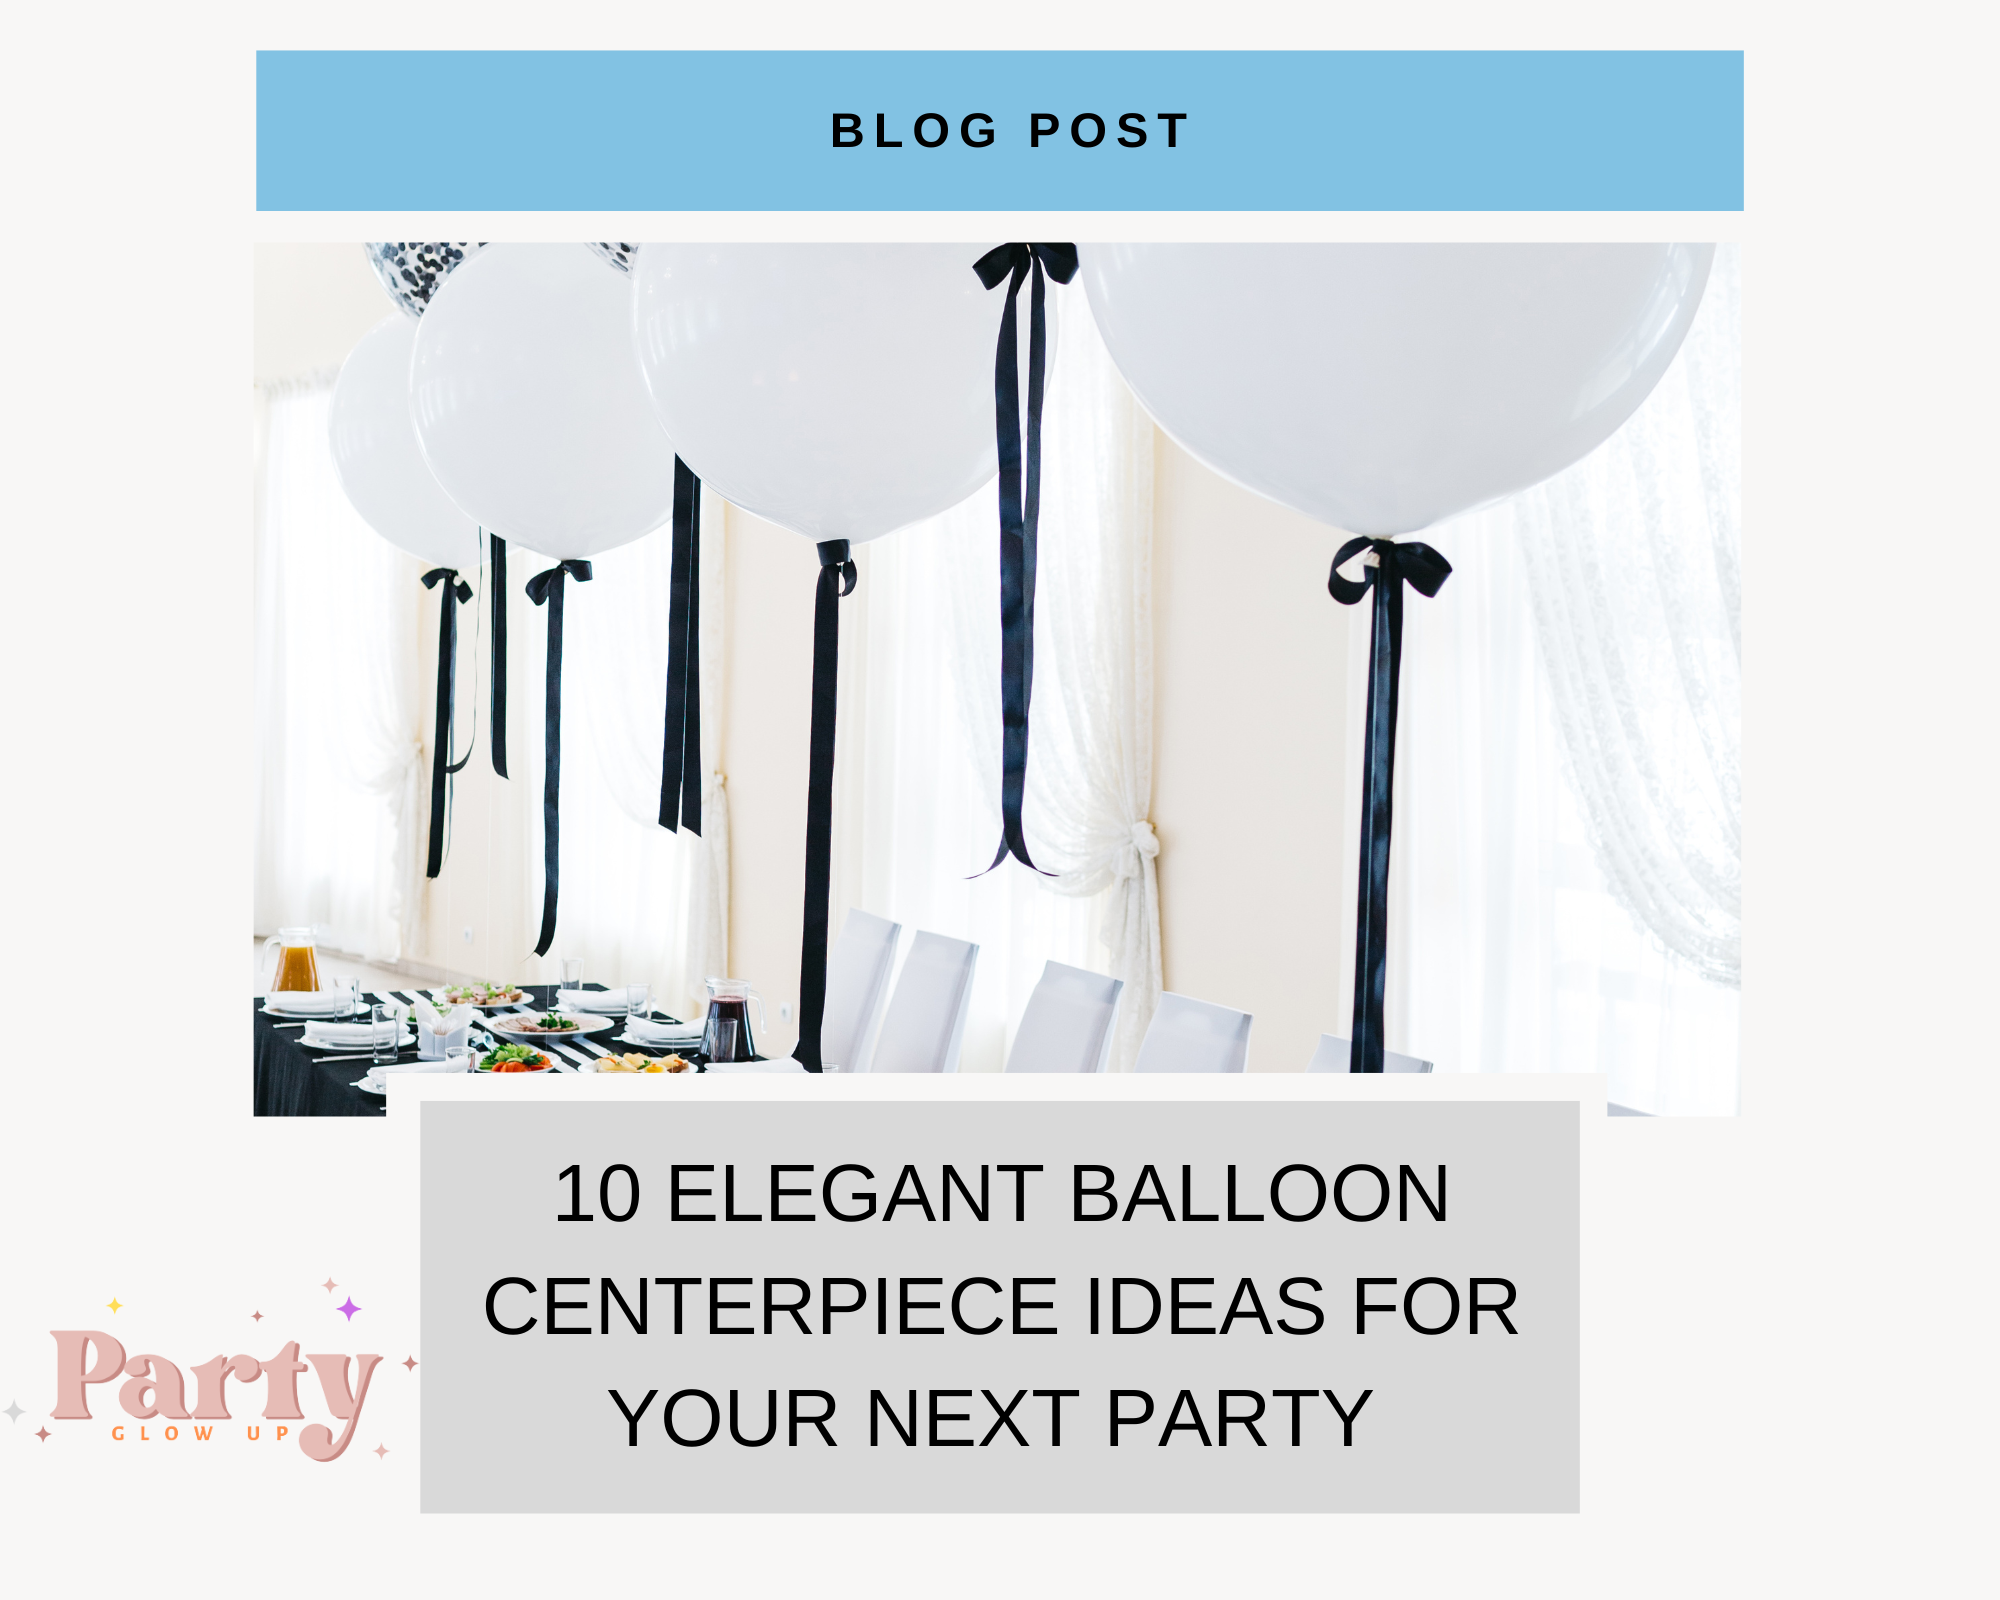 10 Balloon Decorating Ideas without Helium